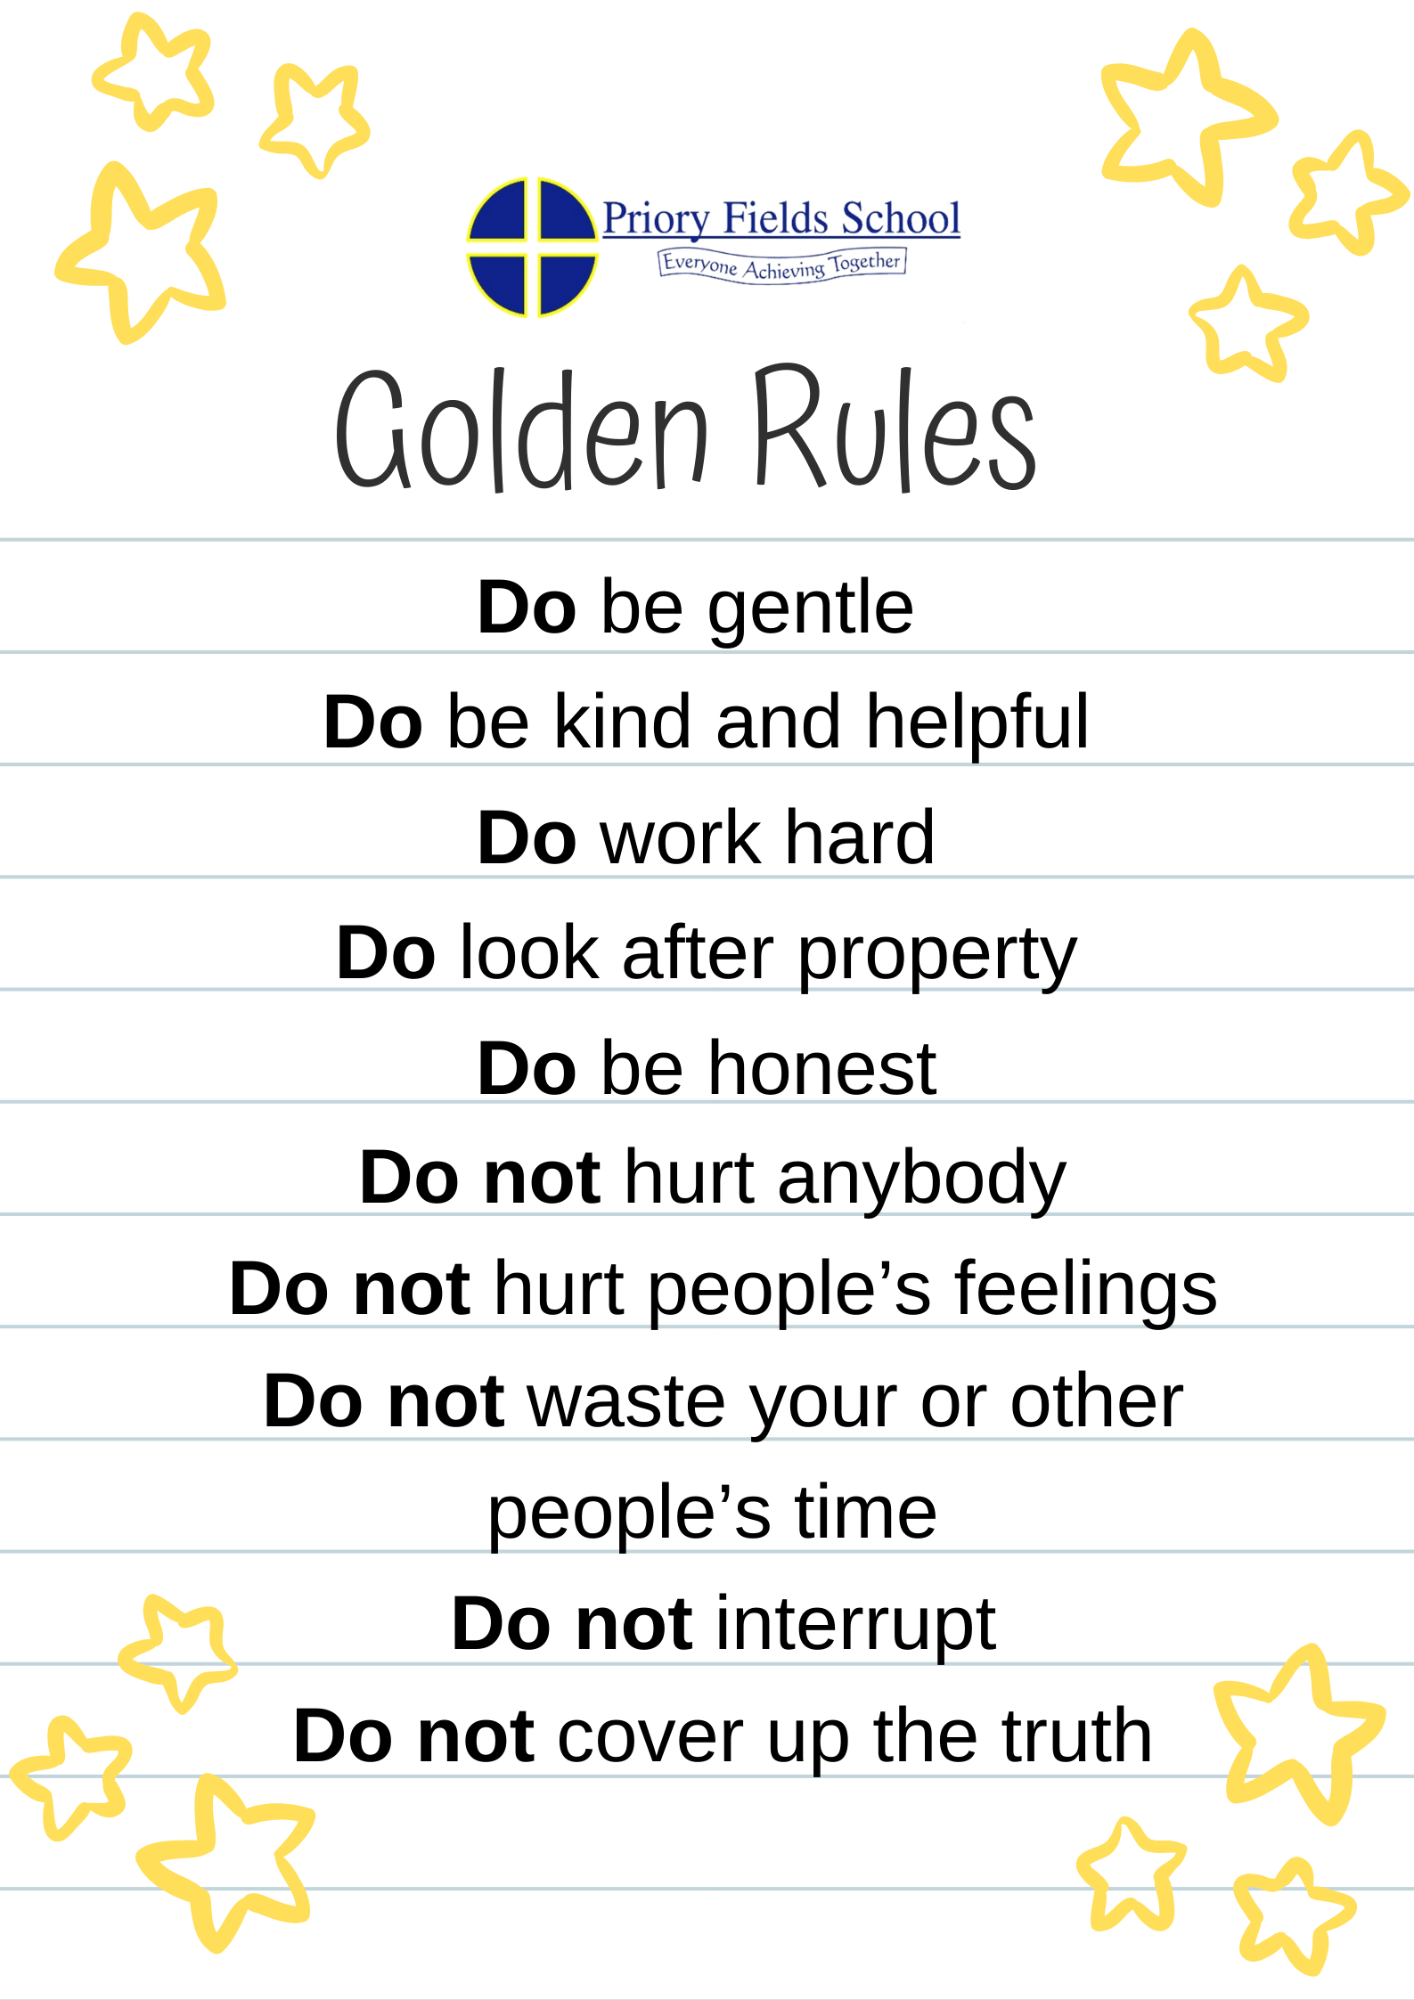 Our golden rules